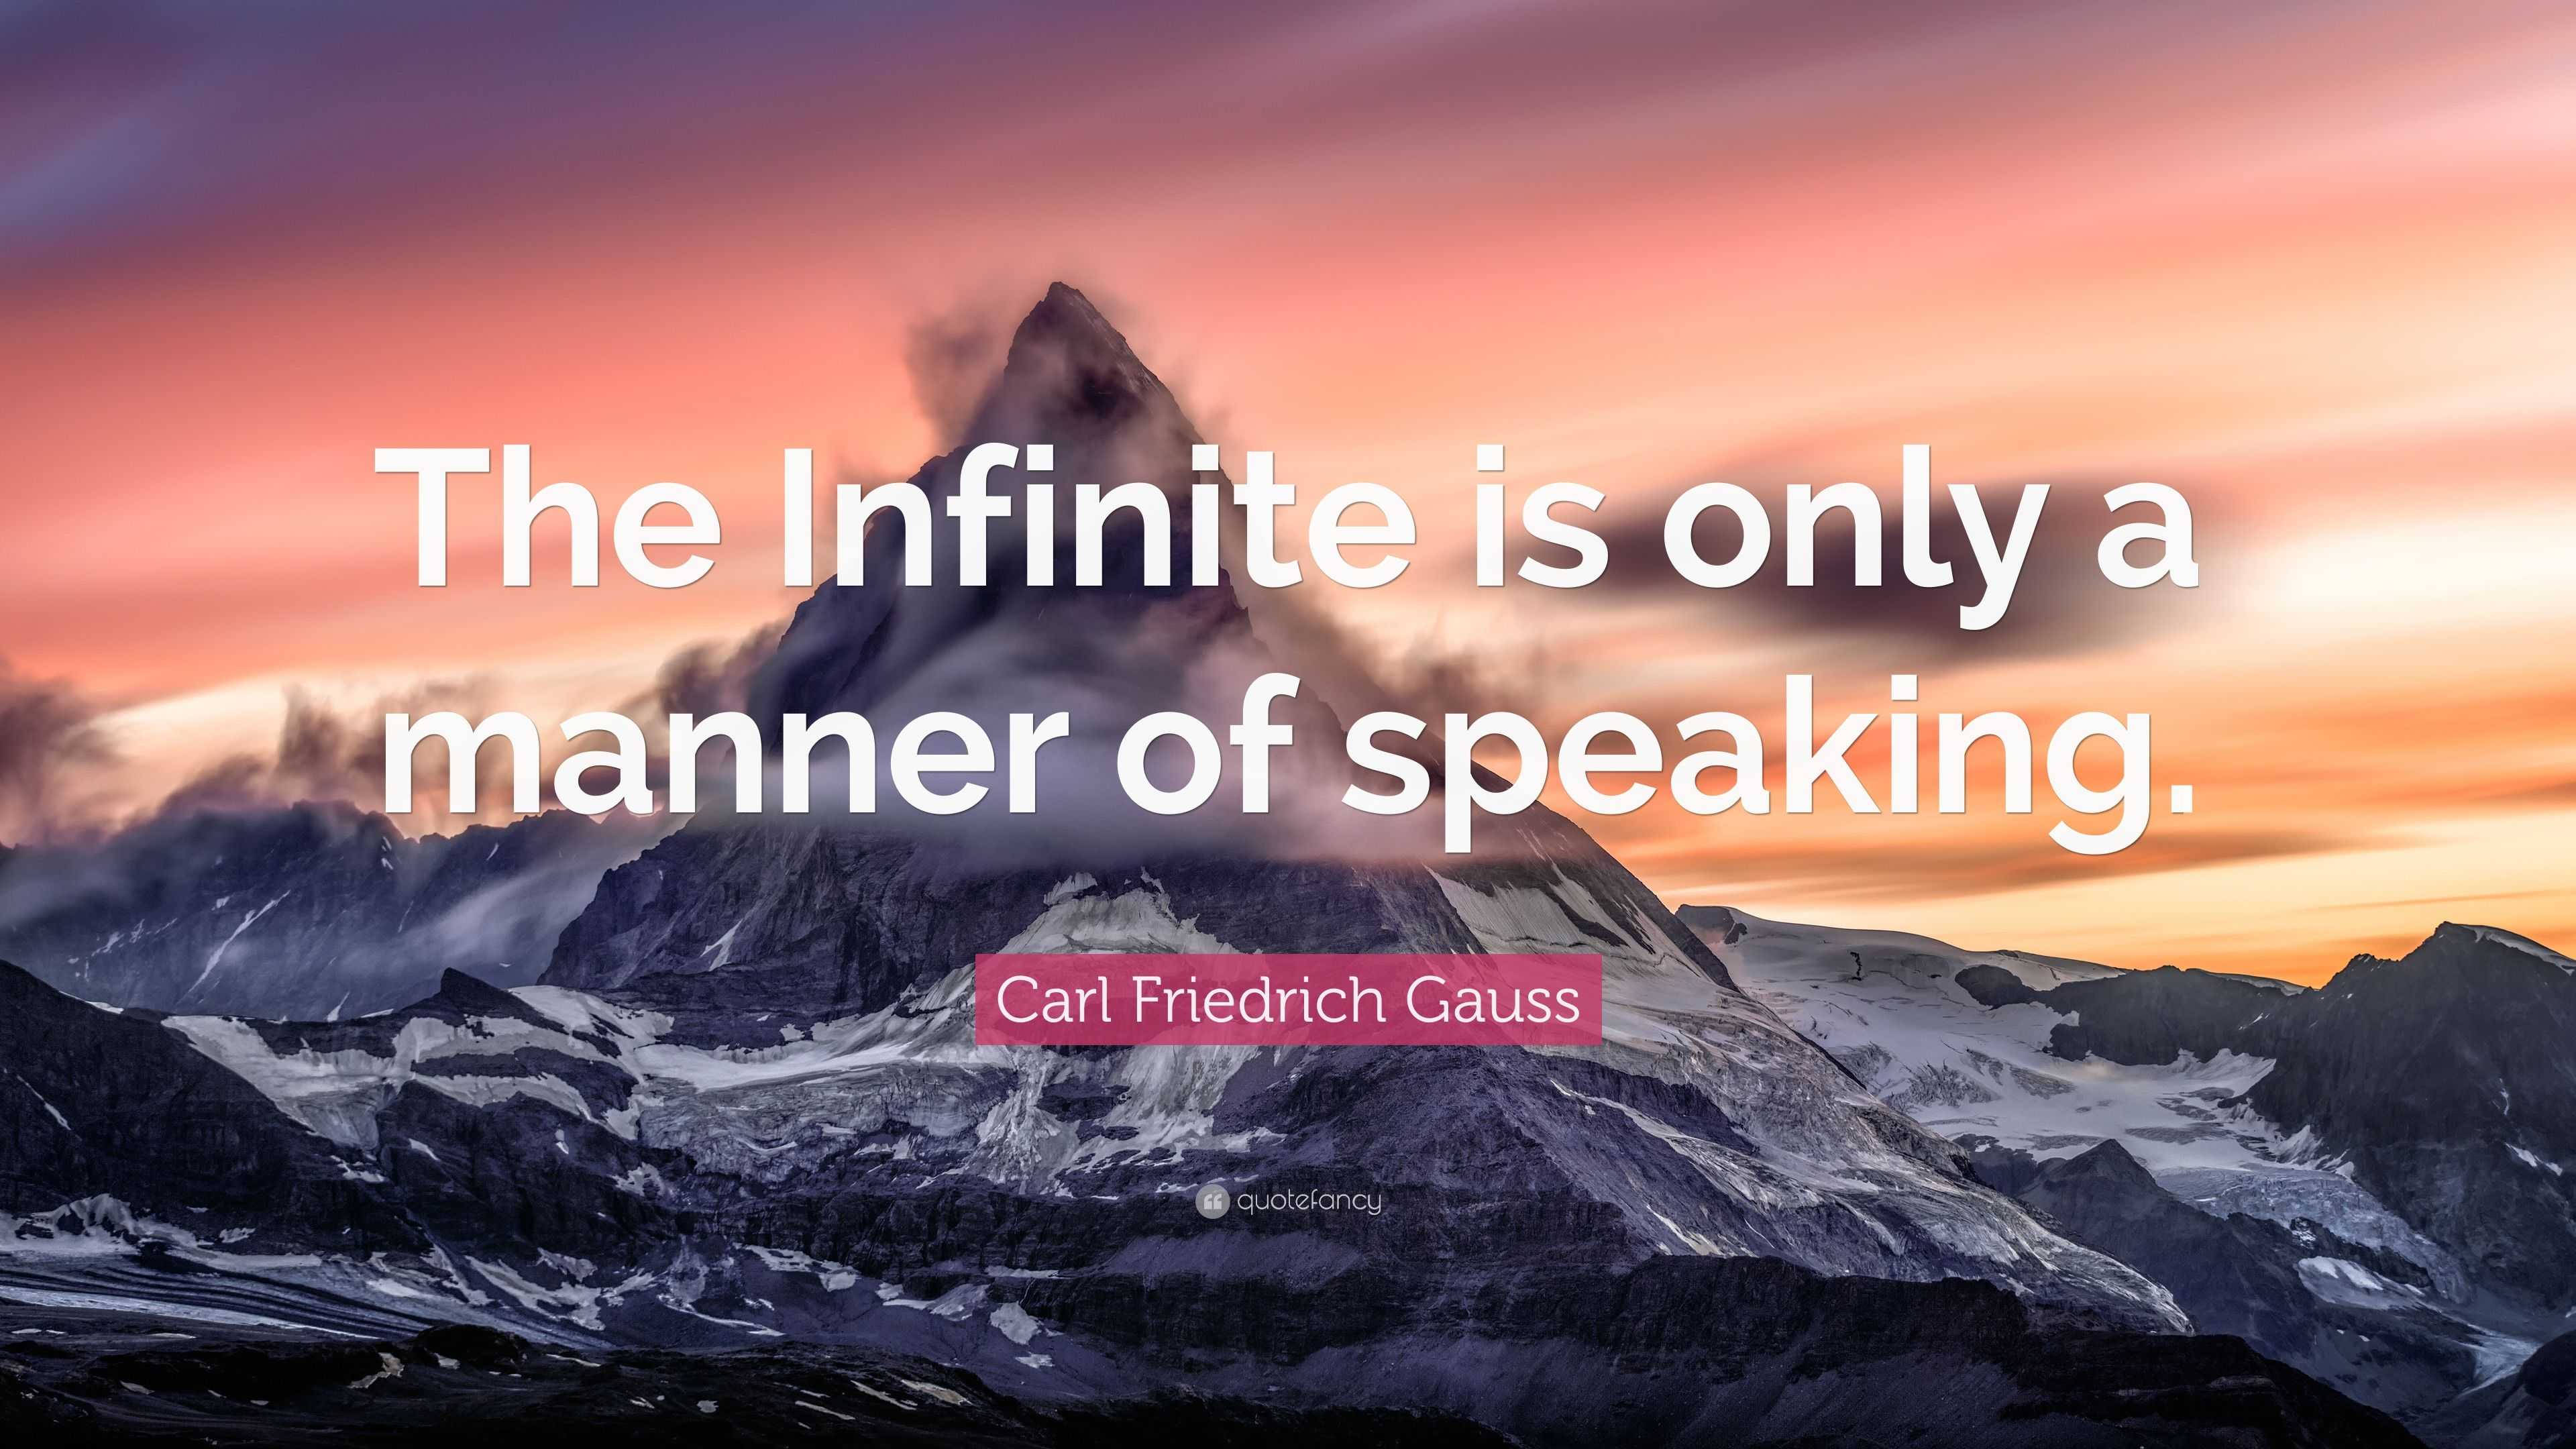 Carl Friedrich Gauss Quote: “The Infinite is only a manner of speaking.”